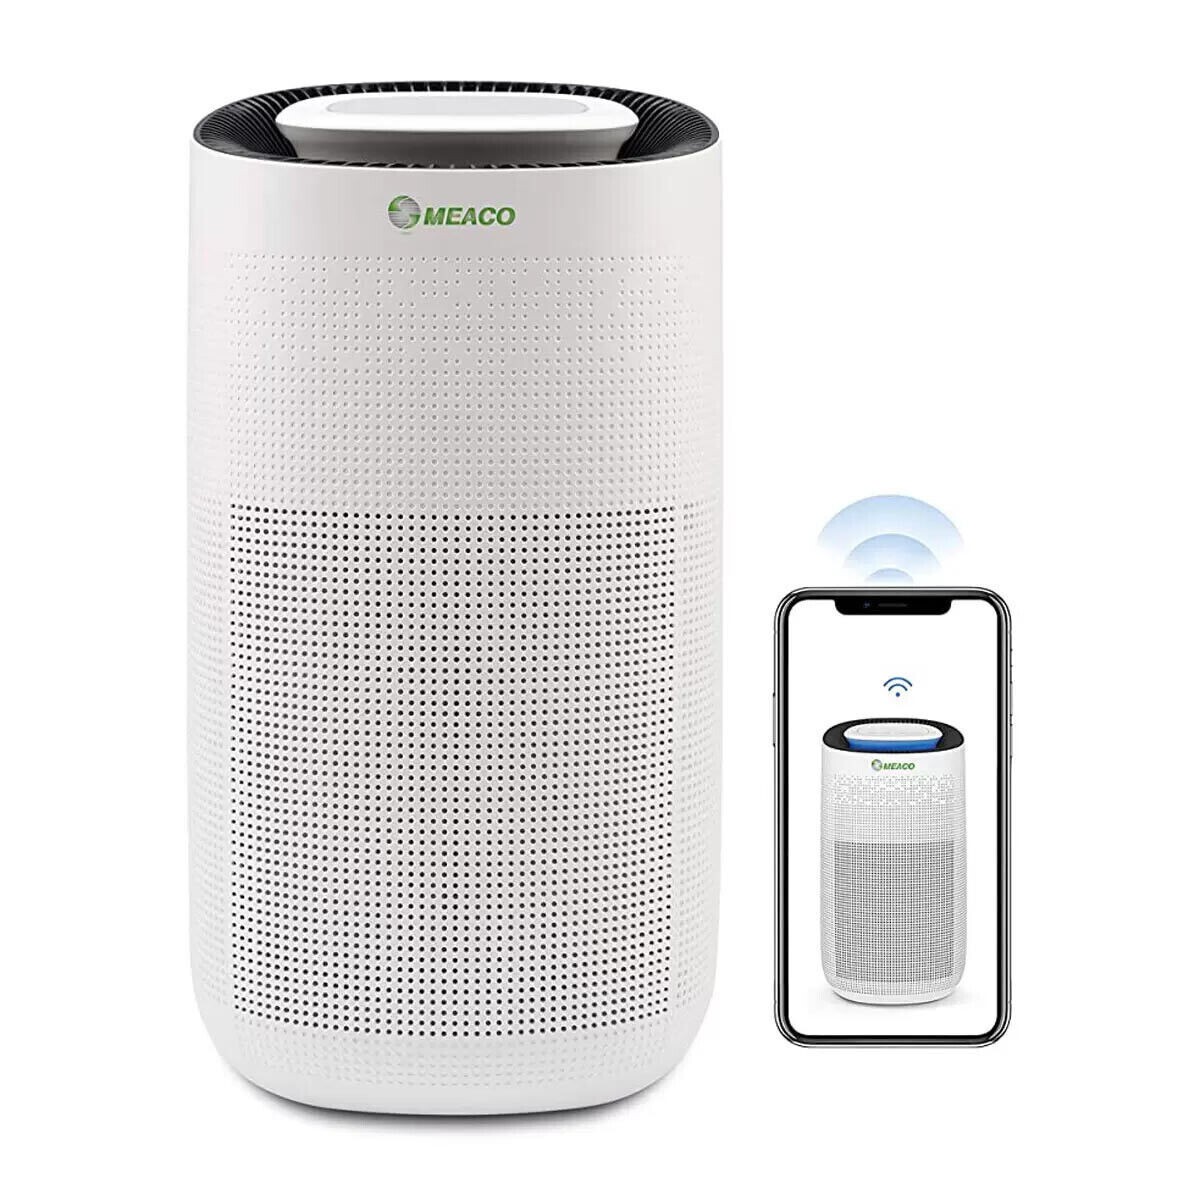 Meaco WiFi Enabled Air Purifier for rooms upto 76m² MeacoClean CA-HEPA 76x5